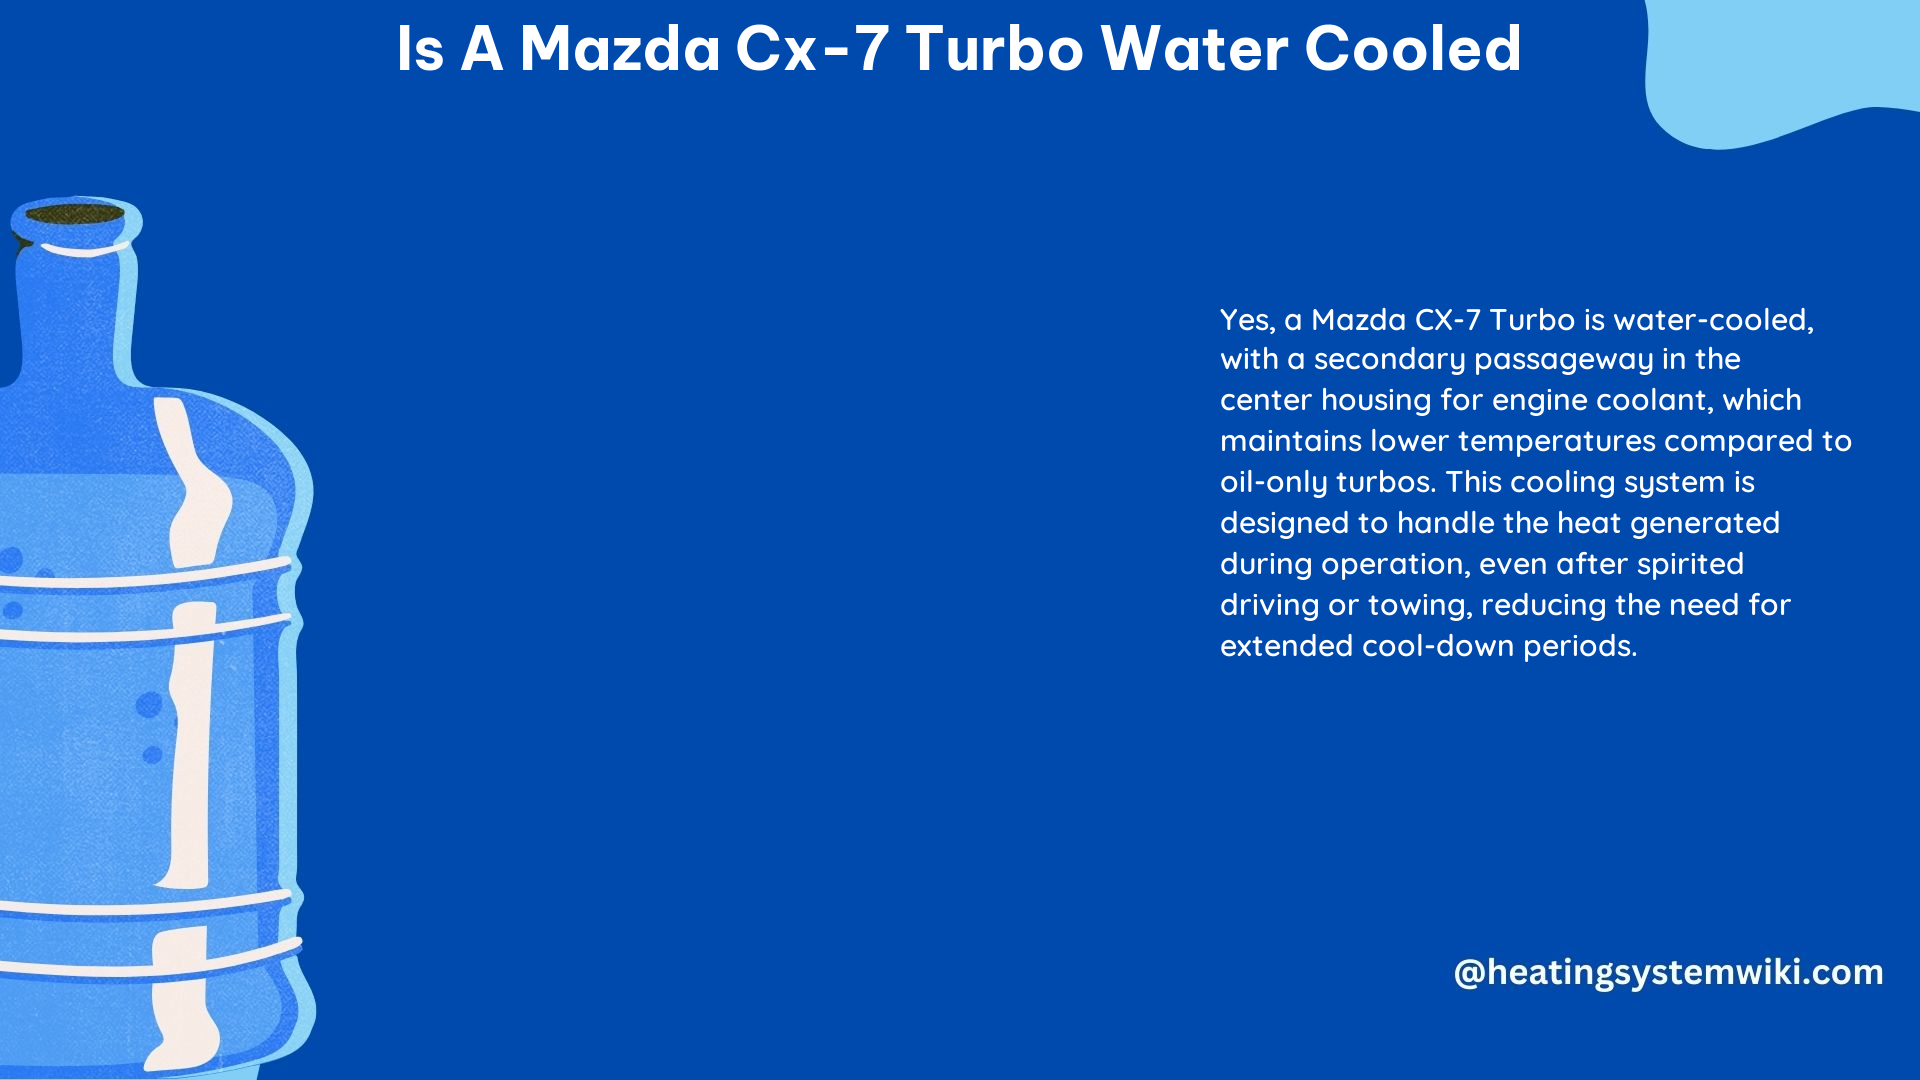 Is a Mazda CX-7 Turbo Water Cooled